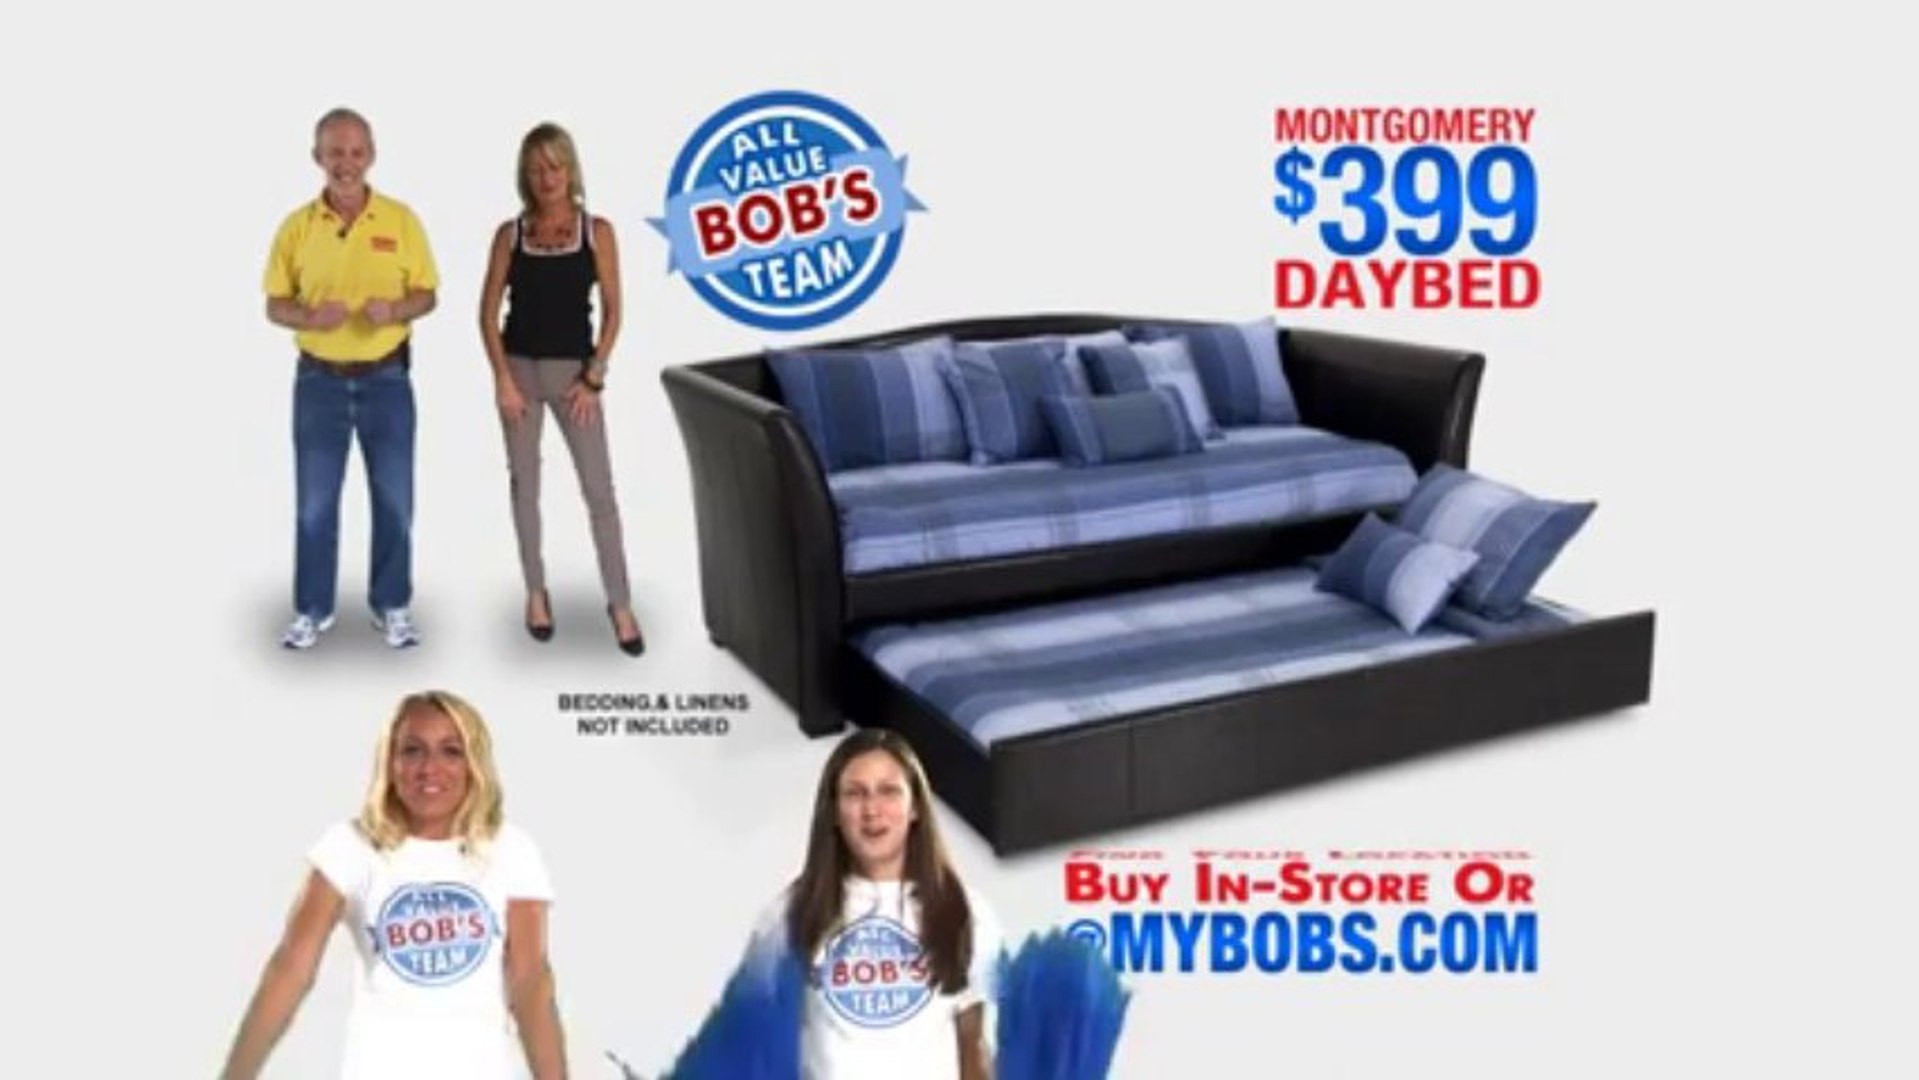 My Montgomery Daybed Had A Proud Place On My Bobs All Value Team